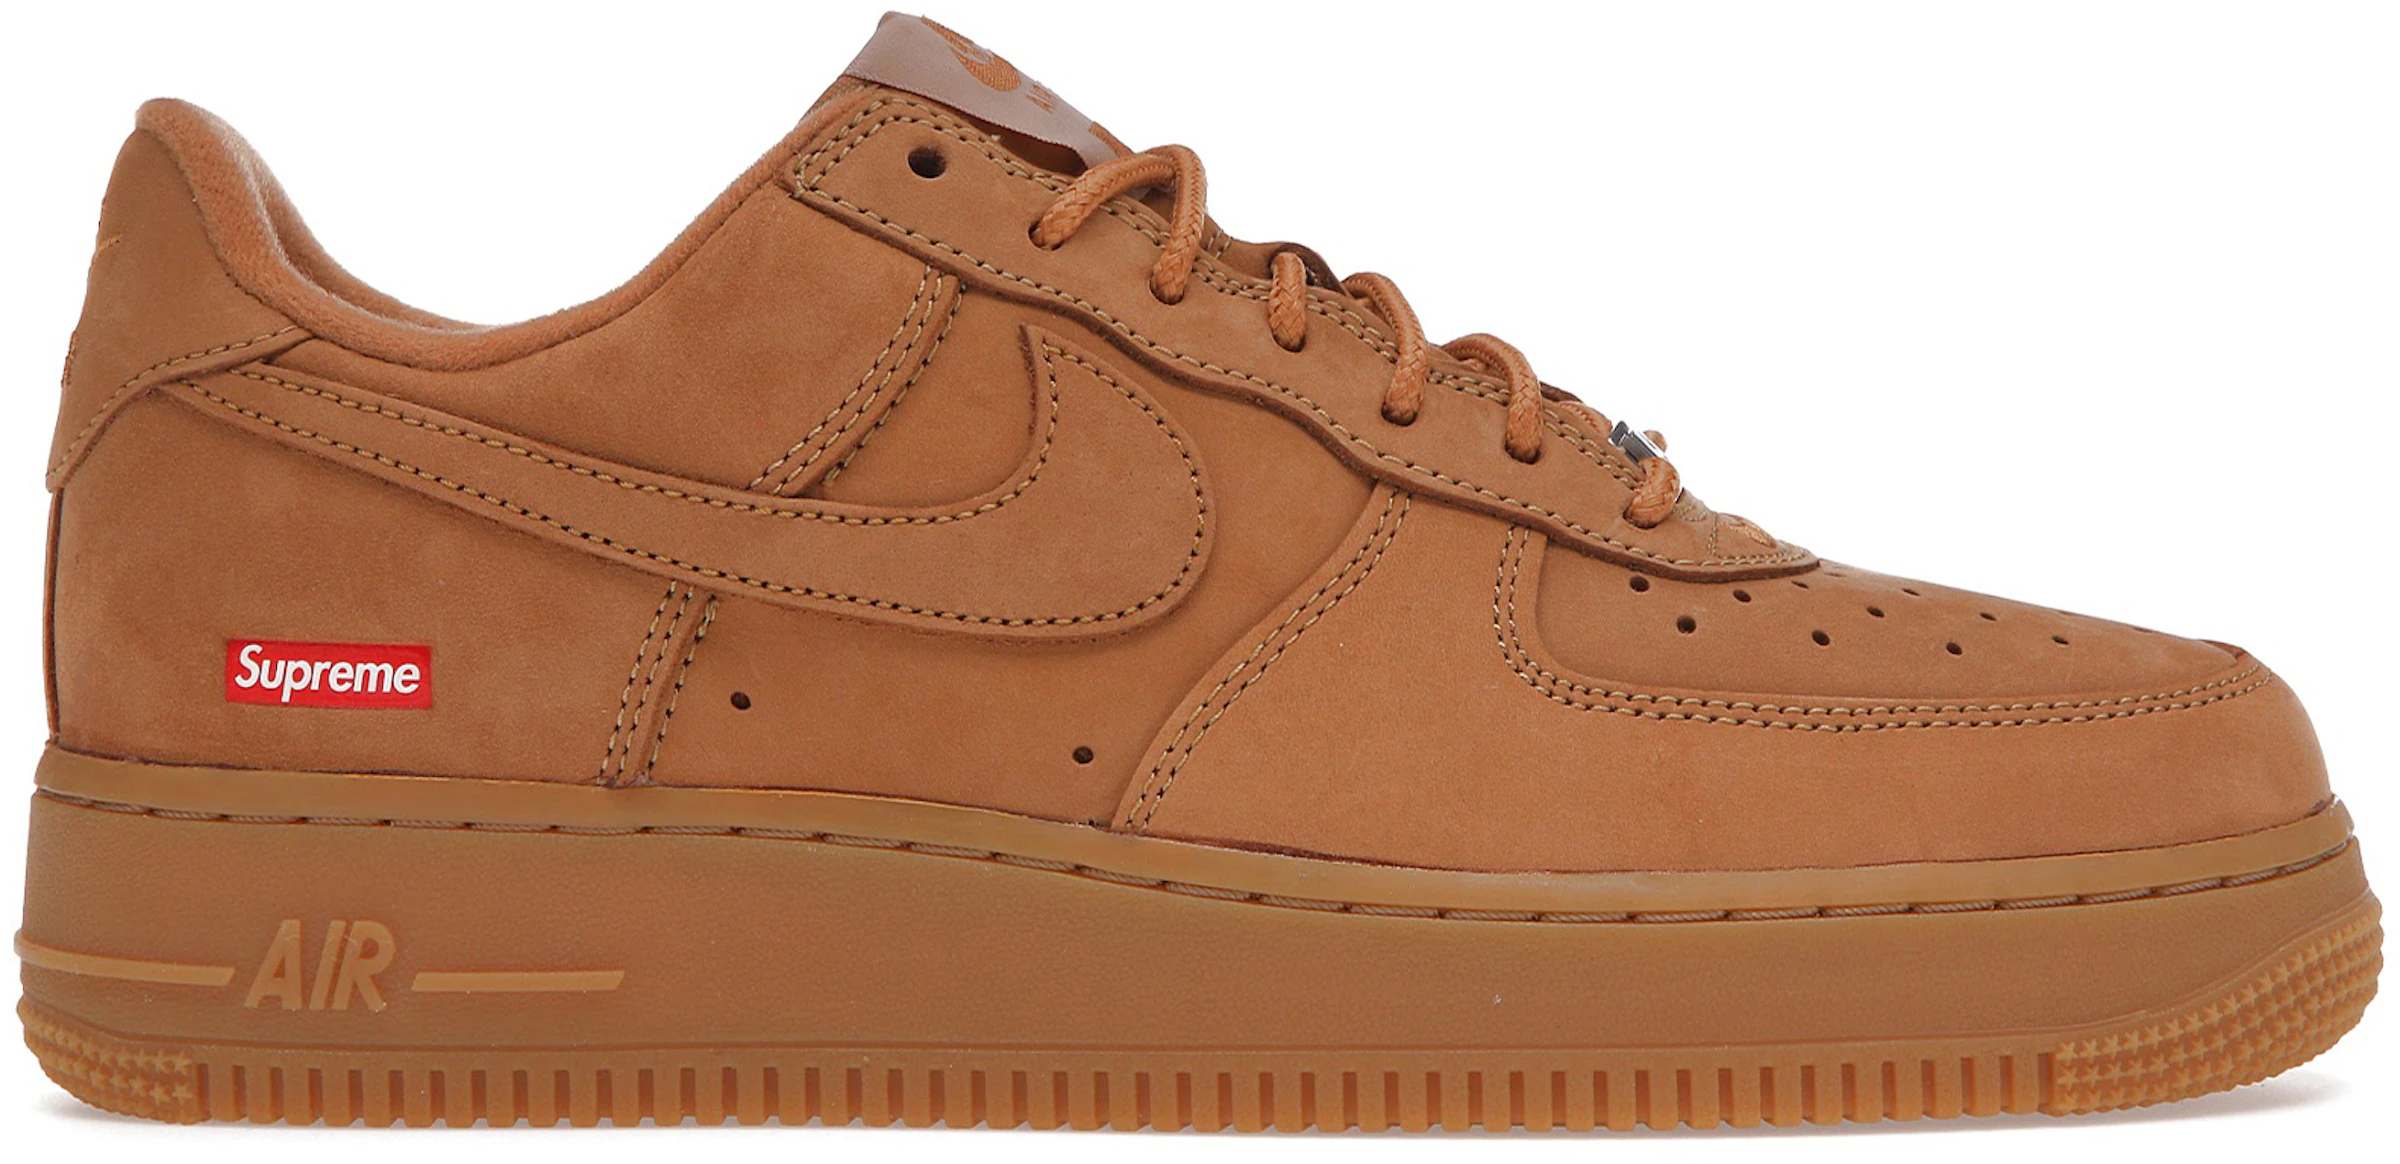 Feodaal kapok Relativiteitstheorie Nike Air Force 1 Low SP Supreme Wheat - DN1555-200 - US